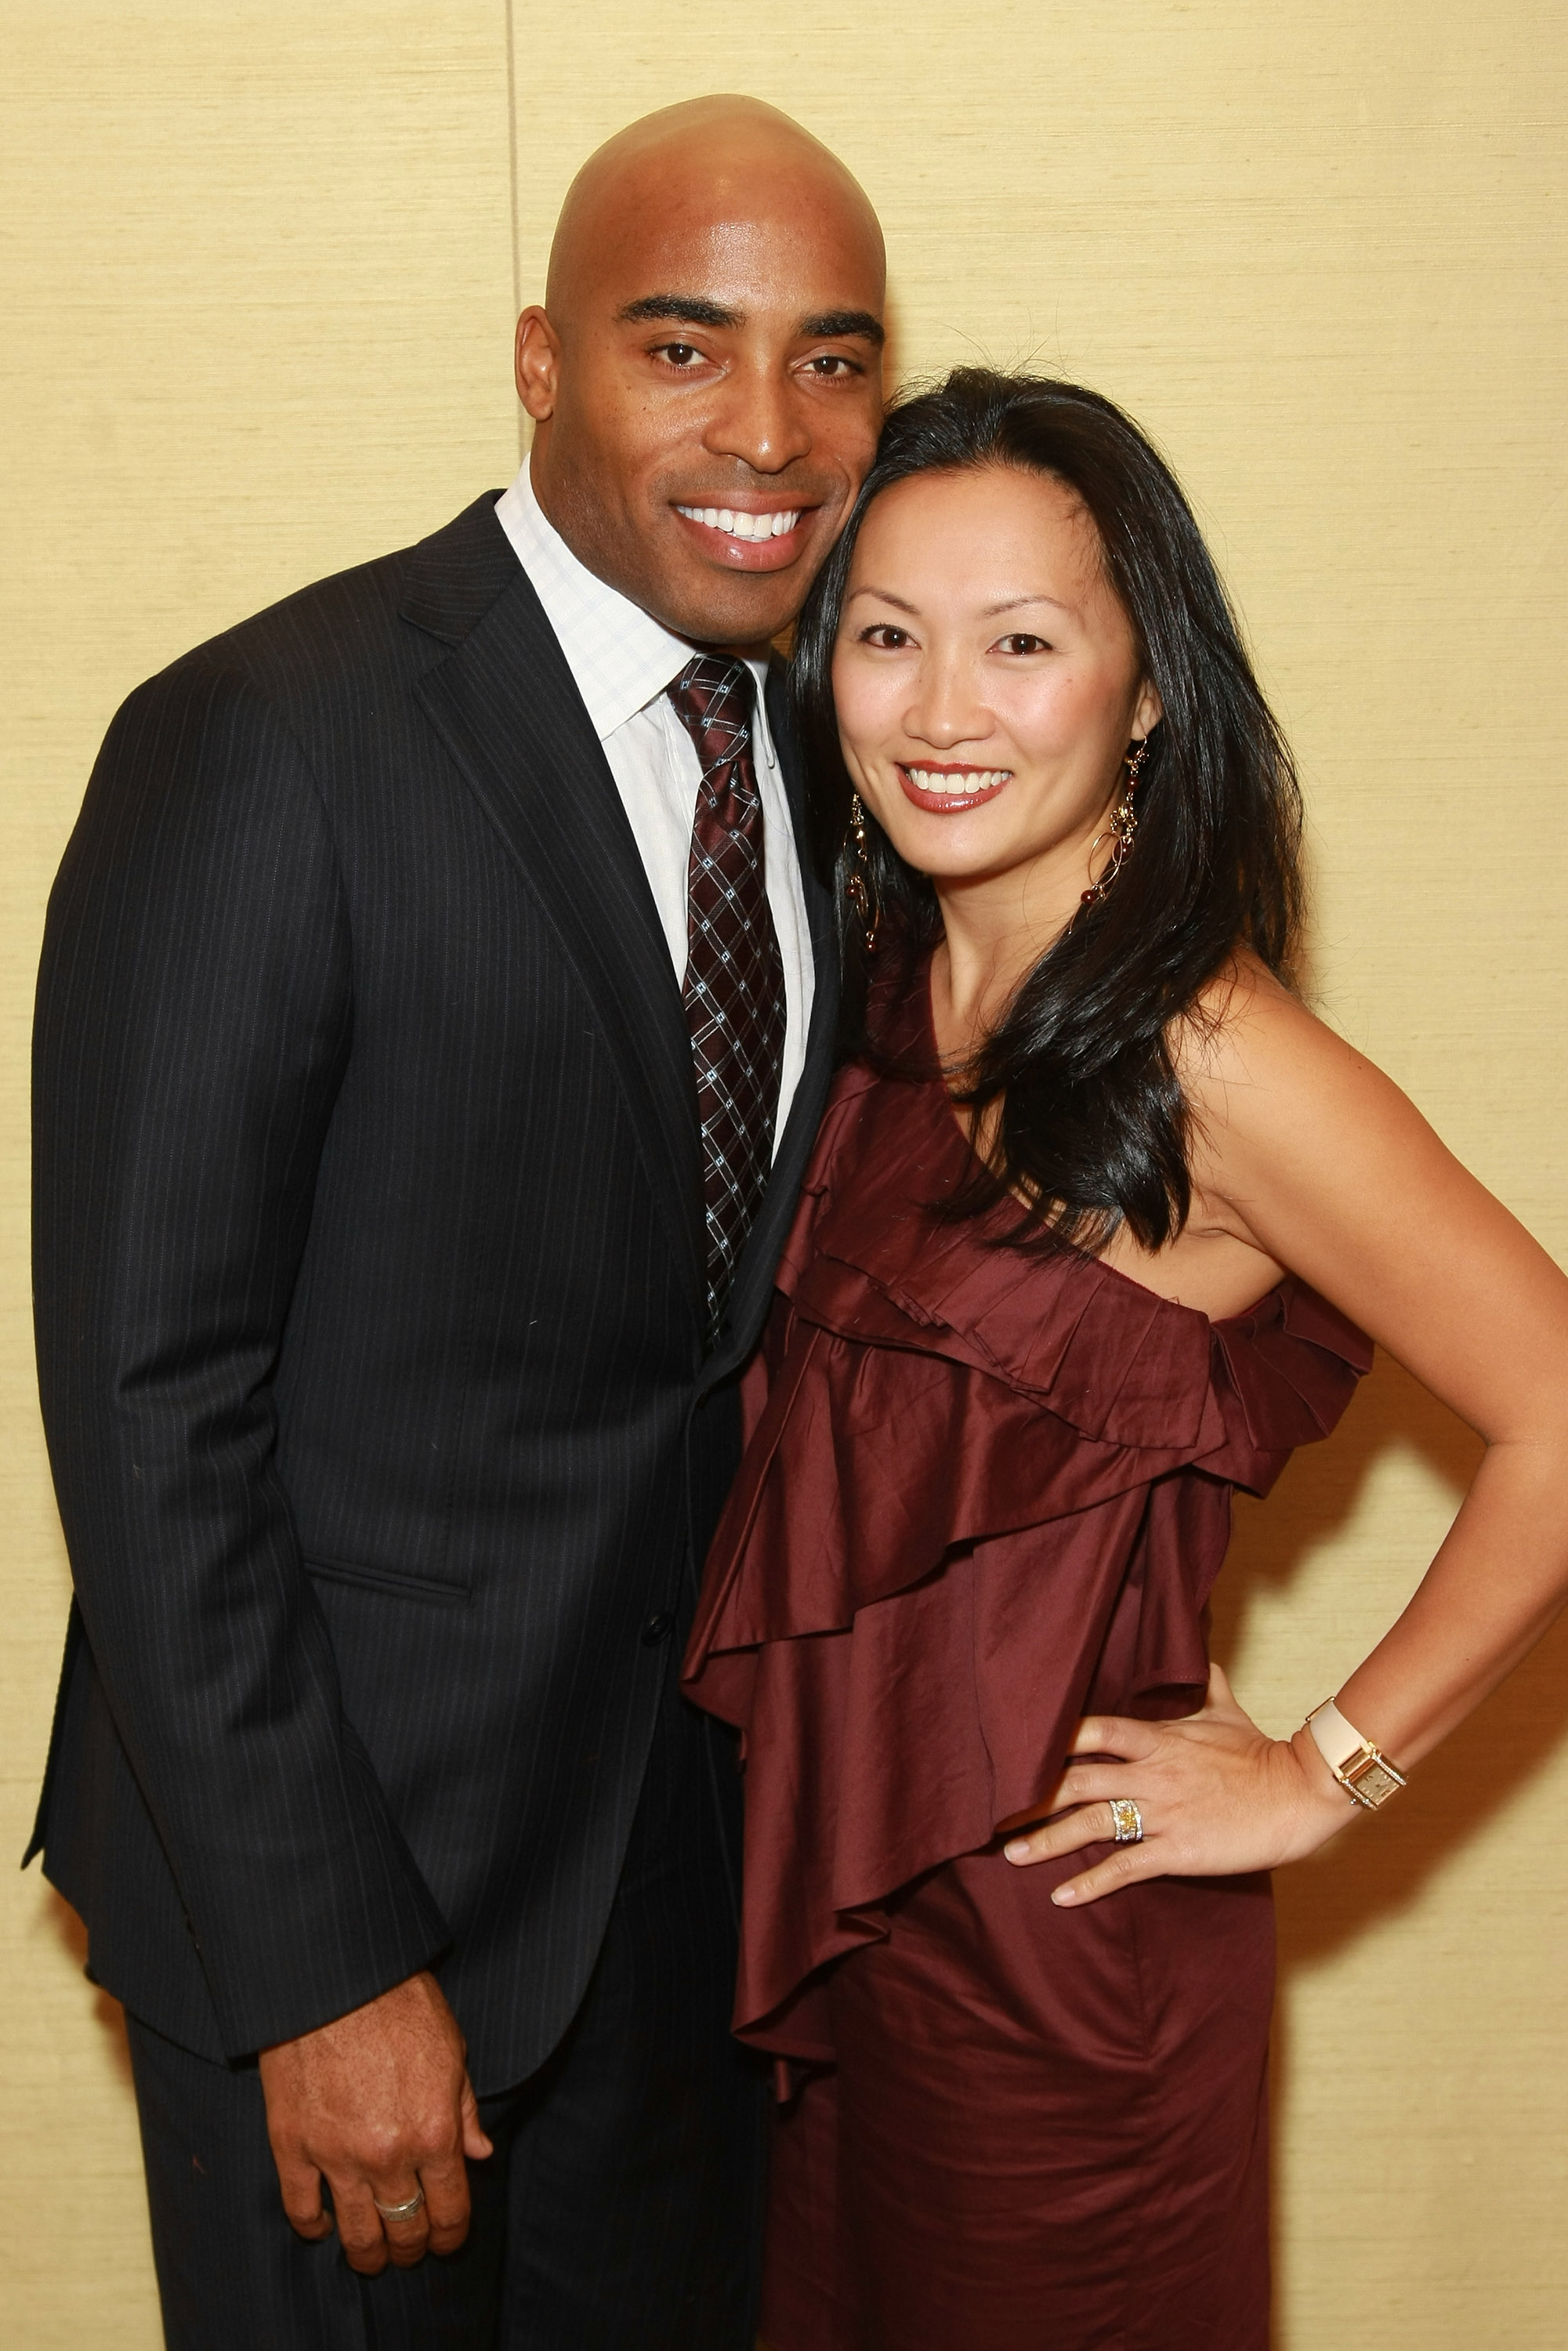 Tiki Barber and Ginny Cha attend the Q Prize Gala hosted by Quincy Jones and Audemars Piguet at Time Warner Center on November 13, 2008, in New York City. | Source: Getty Images